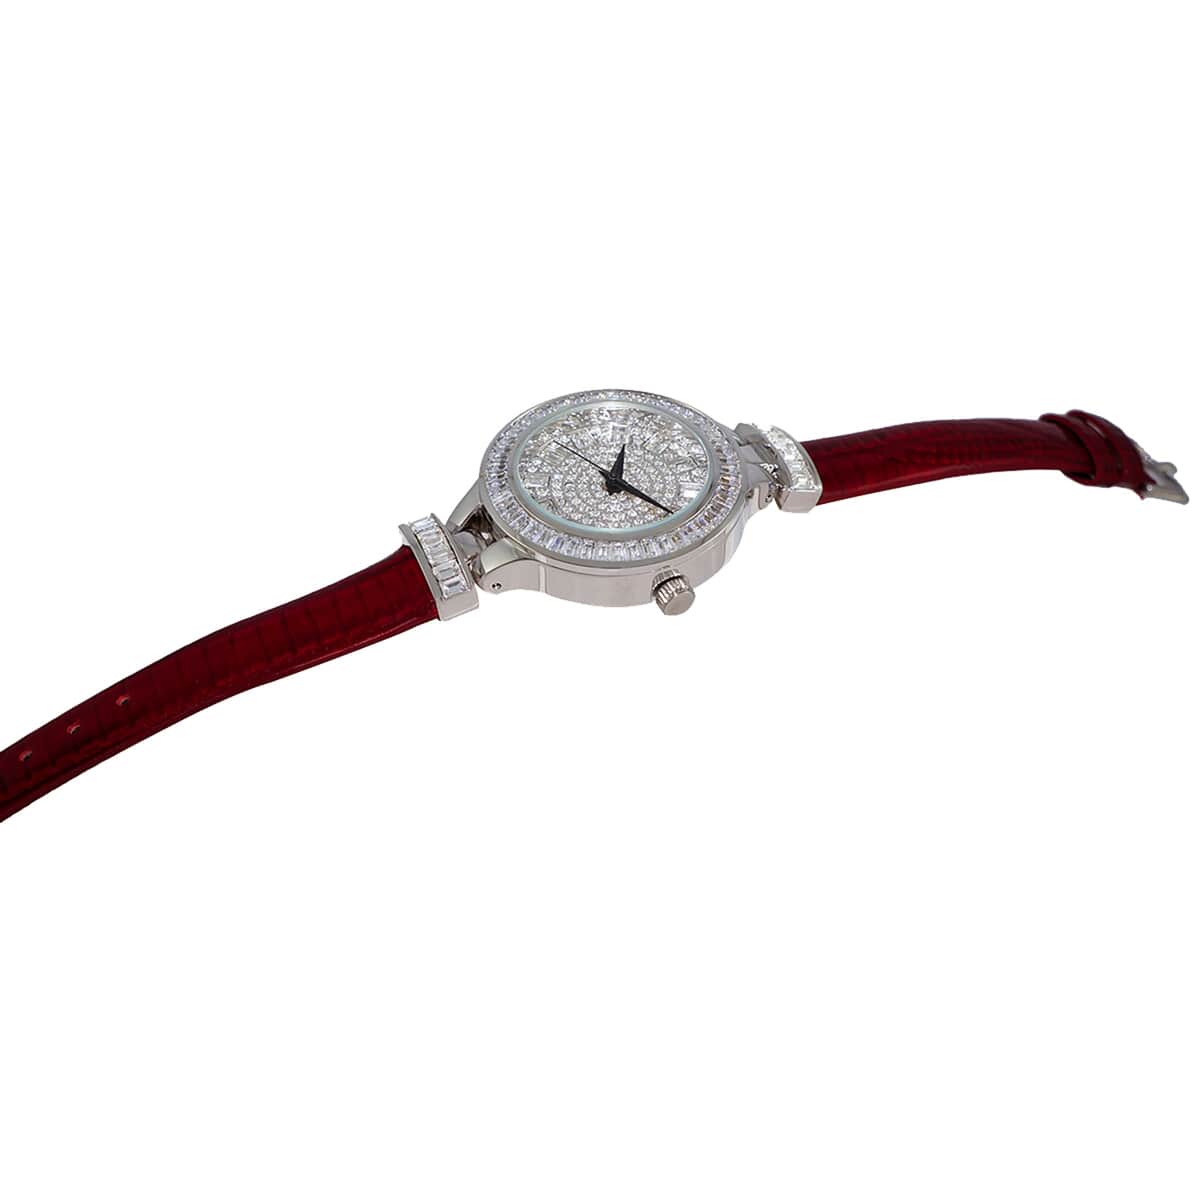 ADEE KAYE Austrian Crystal Japanese Movement Watch in Silvertone and Red Leather Strap (33 mm) image number 1